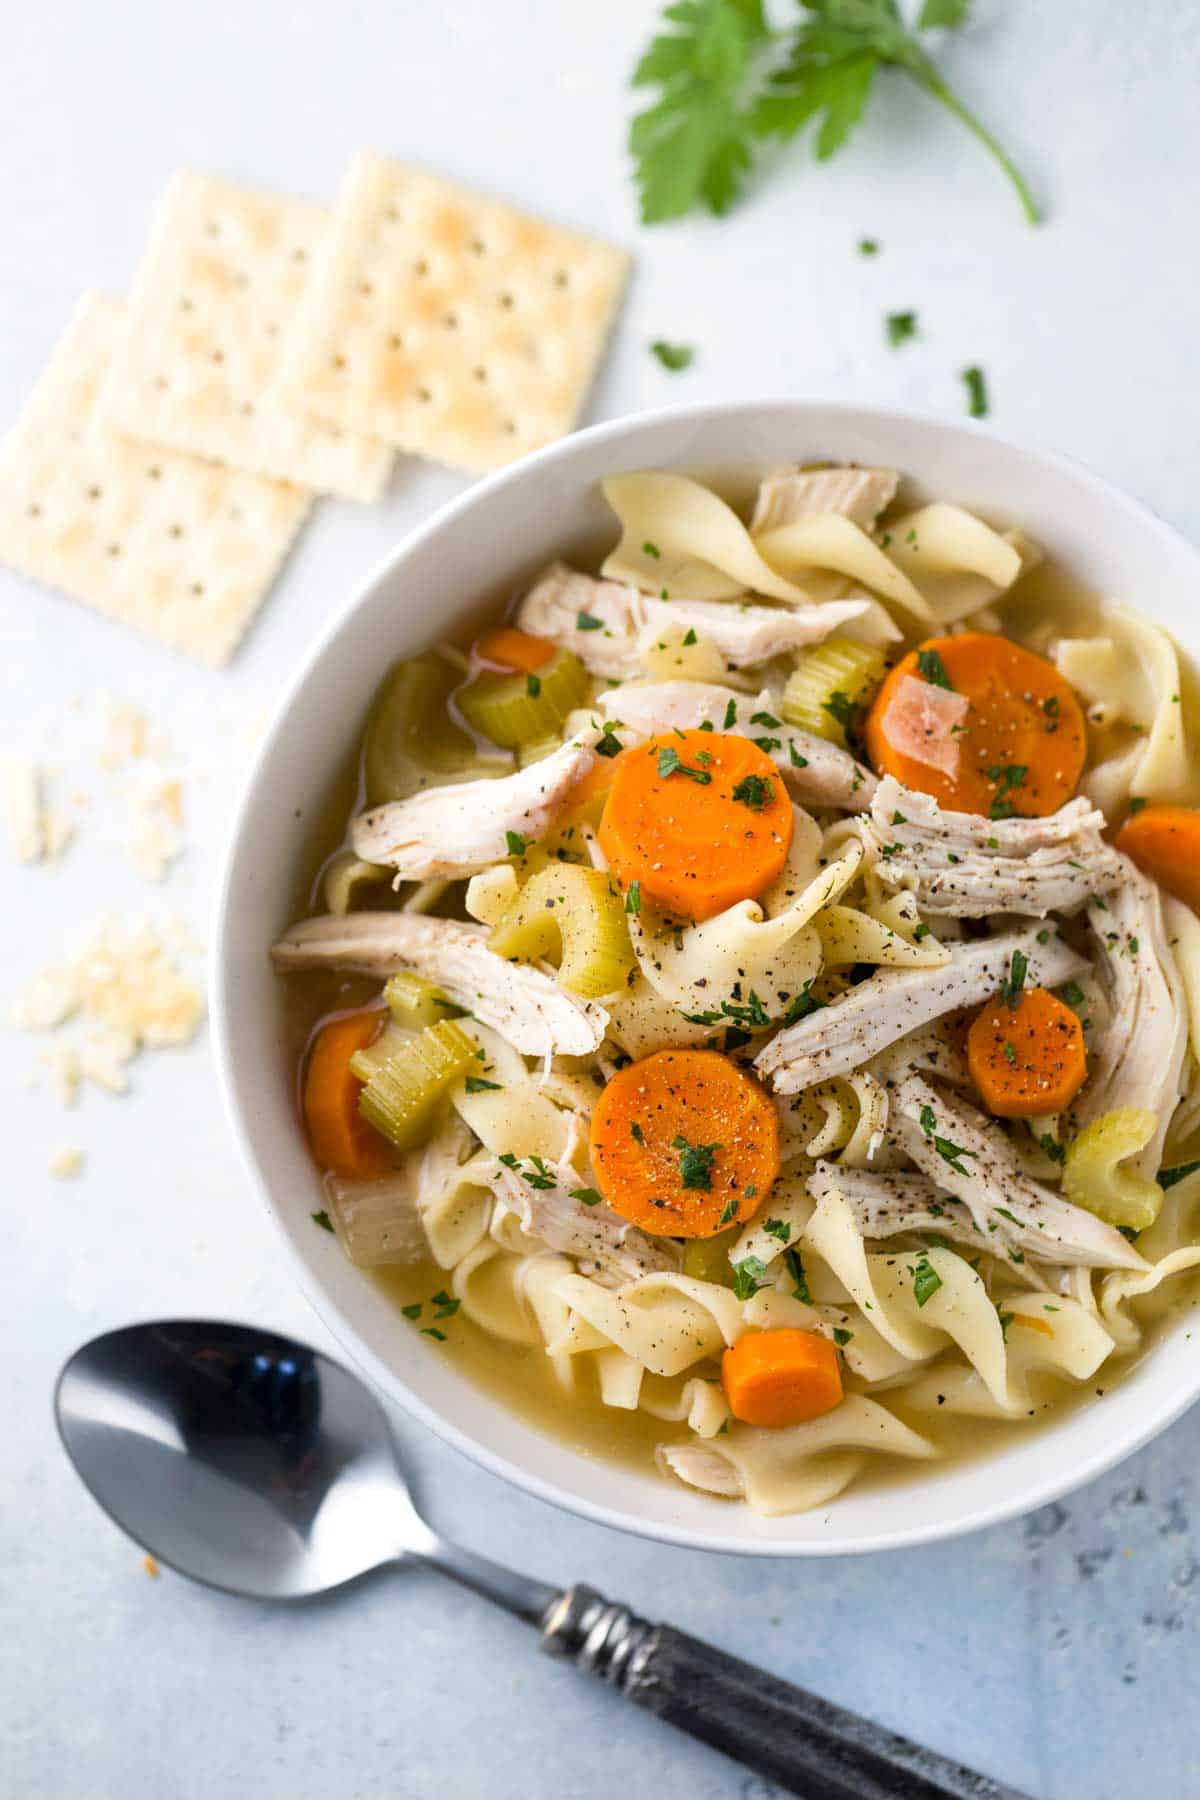 Simple Chicken Soup Recipe
 Easy Slow Cooker Chicken Noodle Soup Recipe